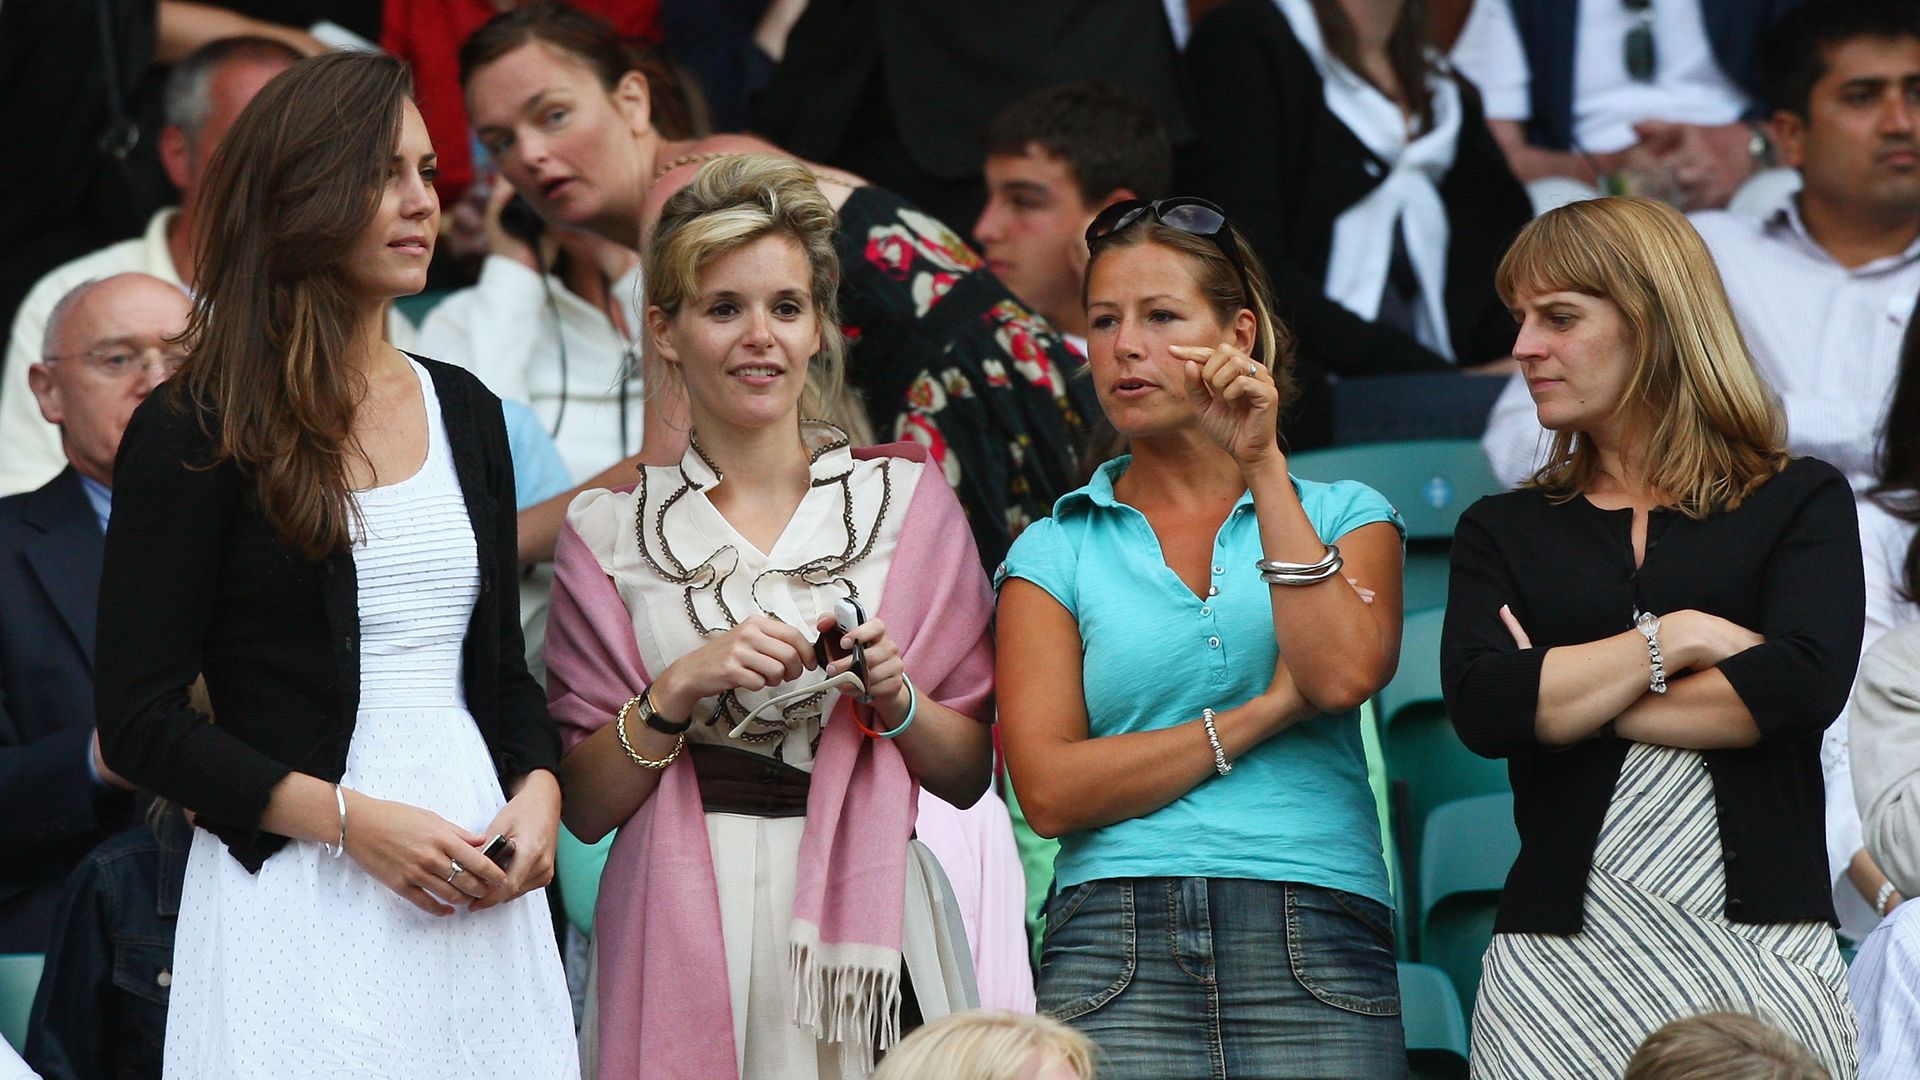 Kate Middleton with a group of friends at Wimbledon